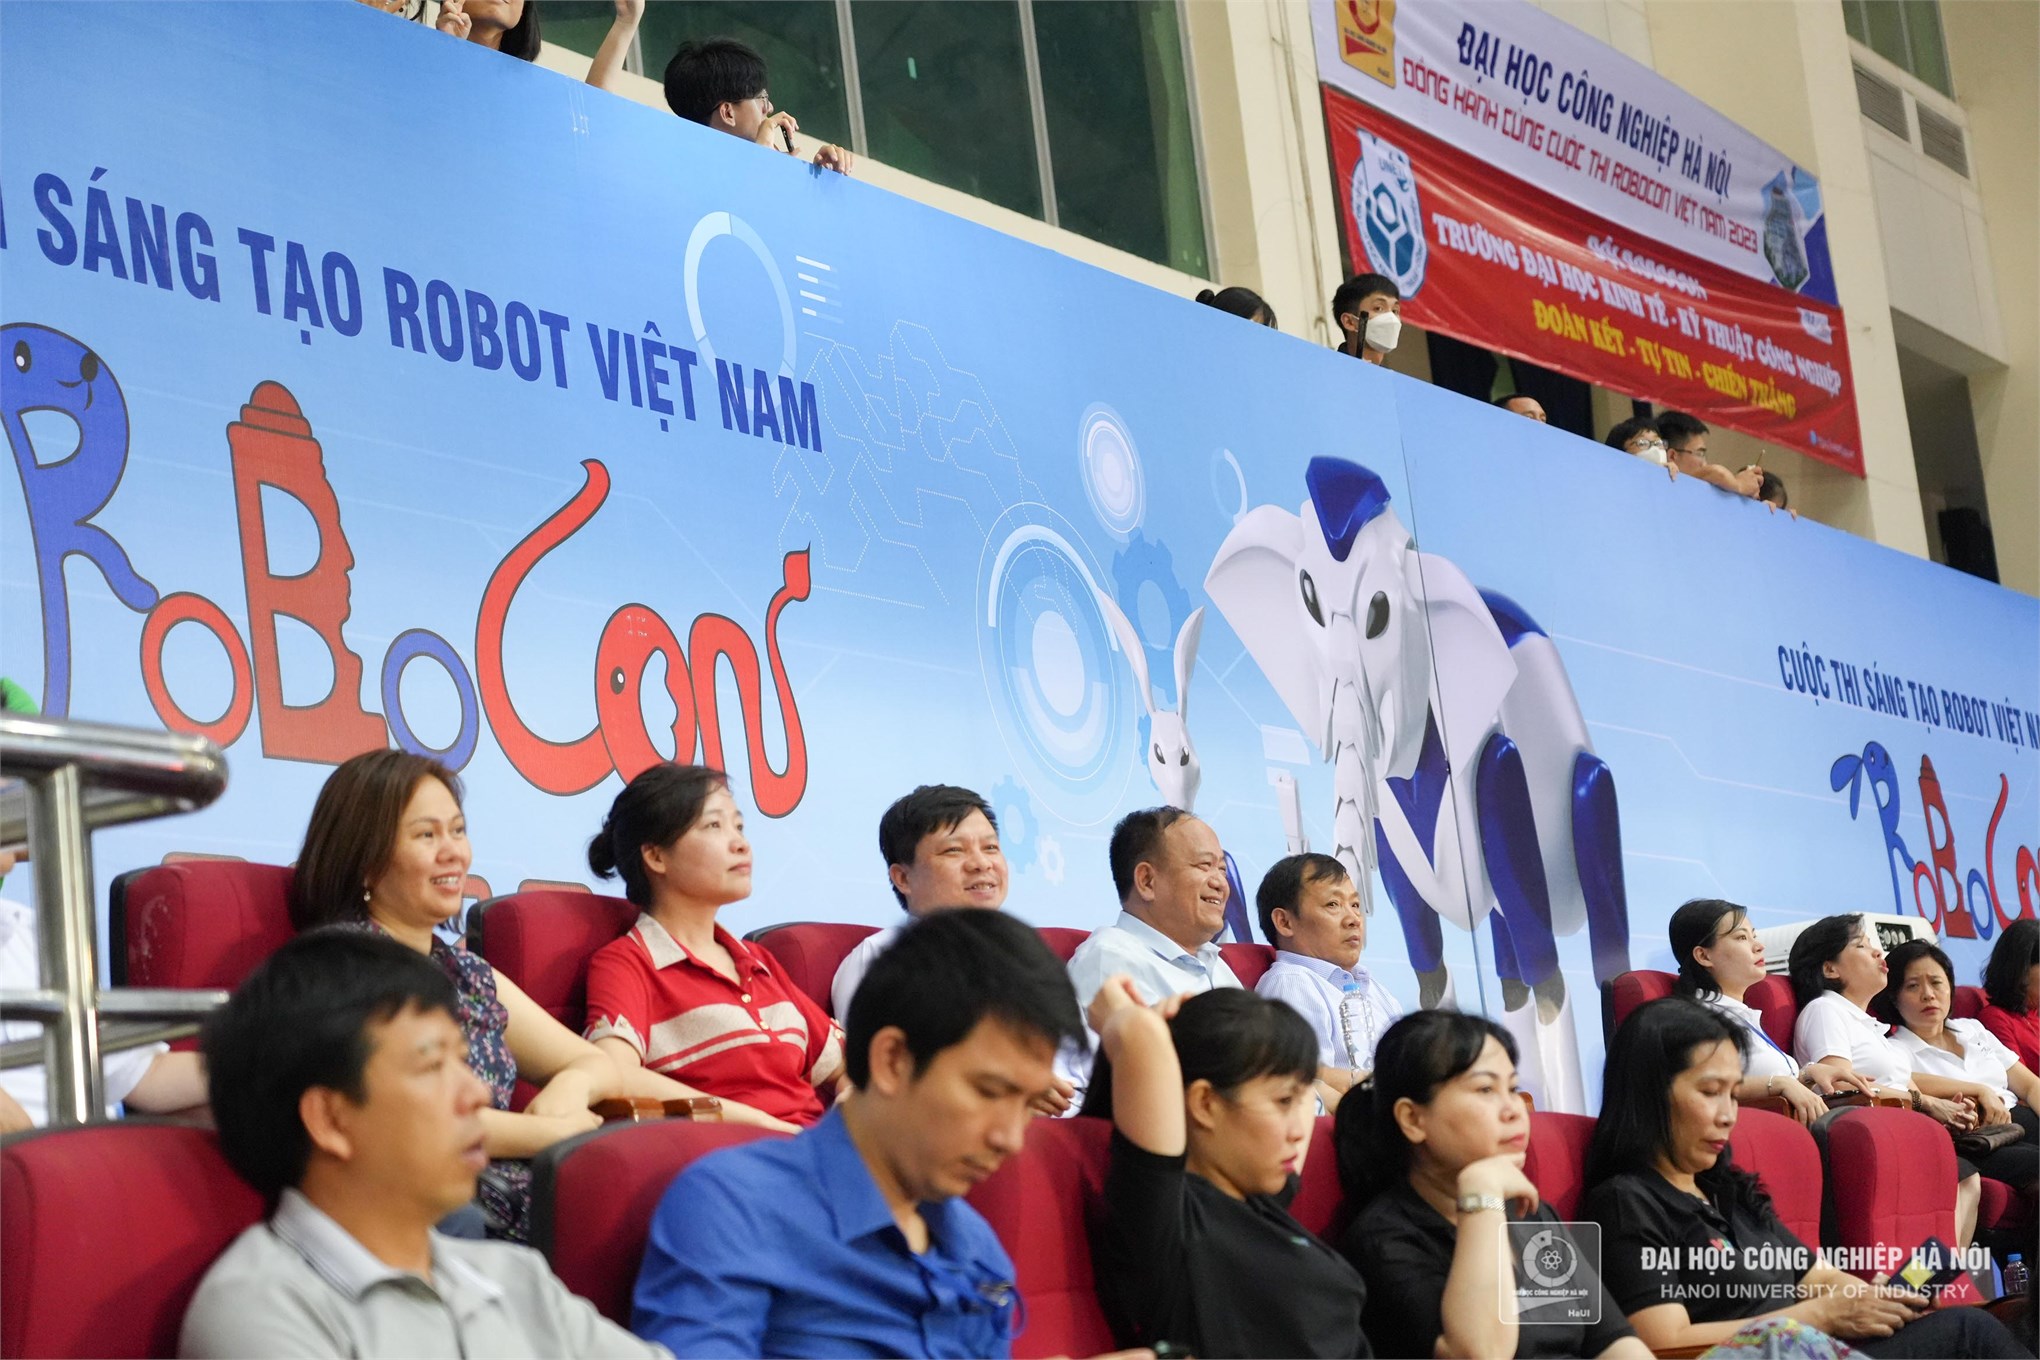 DCN - ĐT02 from Hanoi University of Industry becomes the champion of the Vietnam Robot Creation Contest 2023